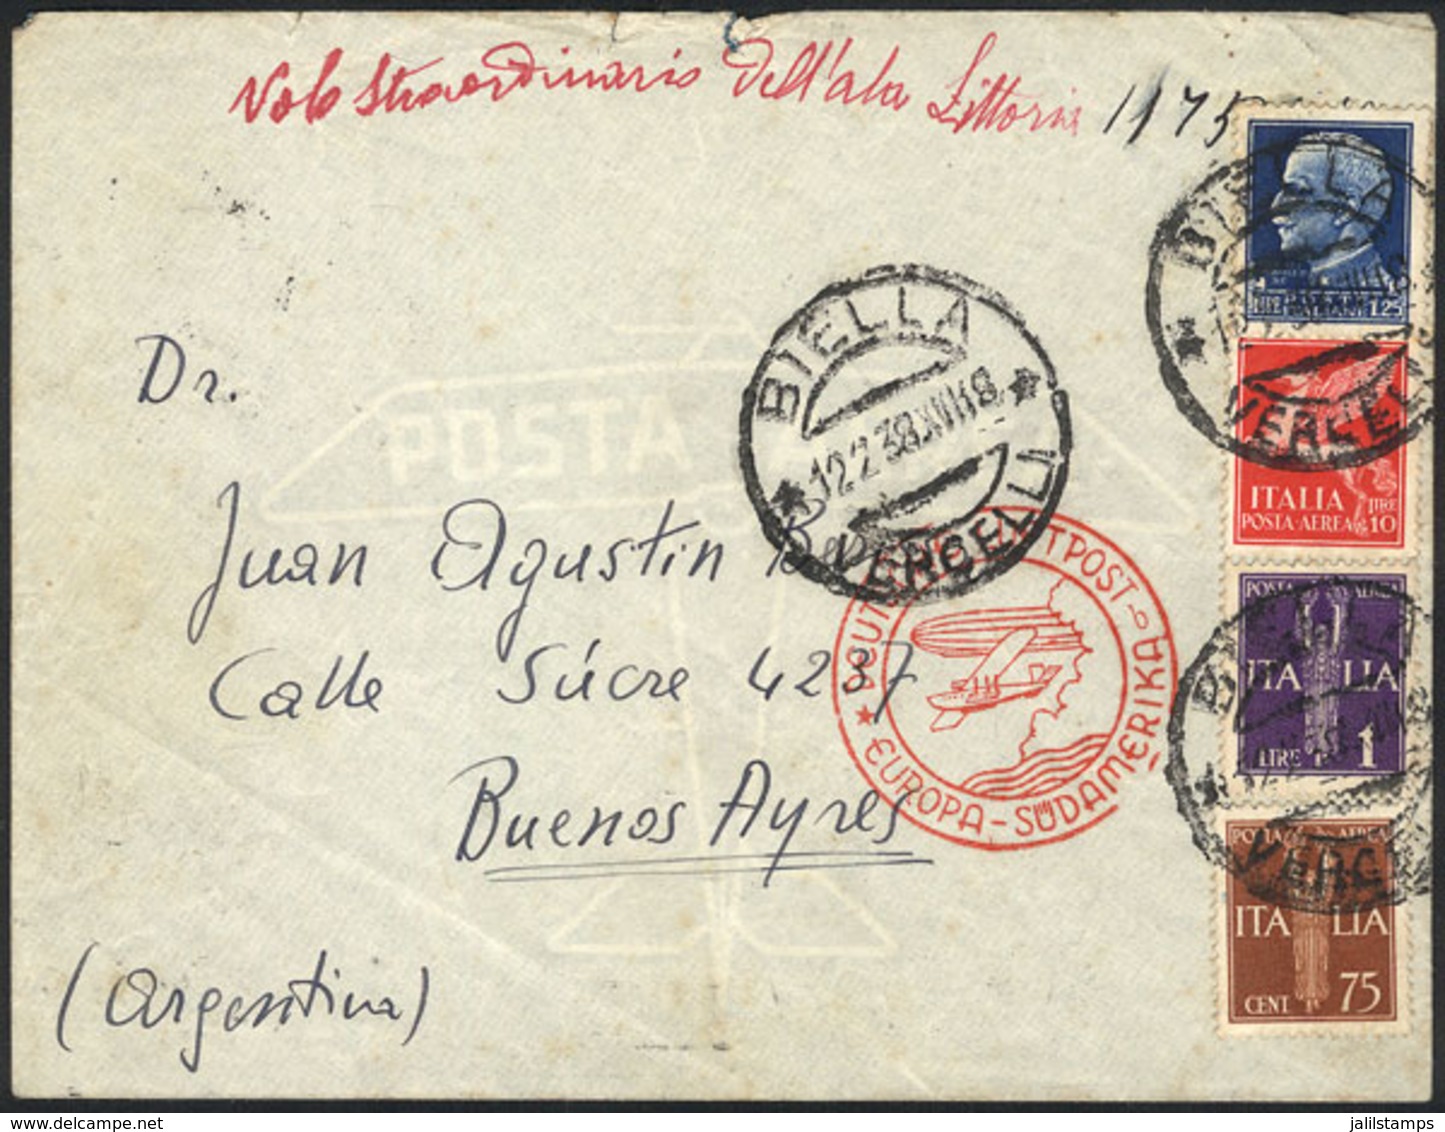 1475 ITALY: 12/FE/1938 Biella - Buenos Aires: Airmail Cover Sent By DHL Franked With 13L., Very Nice! - Unclassified